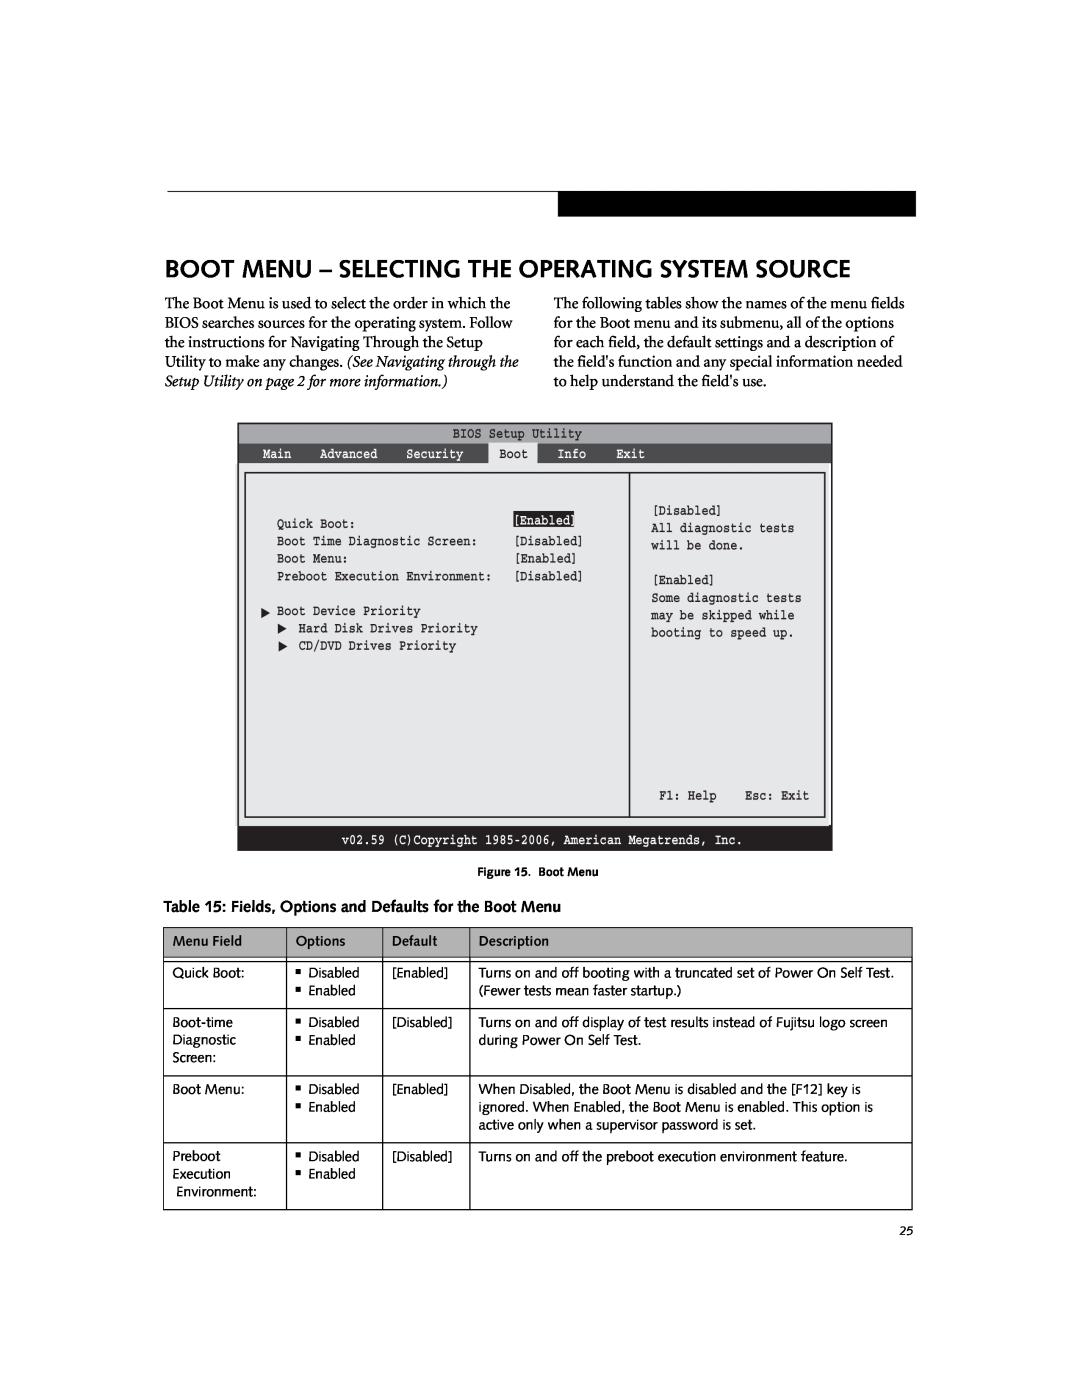 Fujitsu A3110 Boot Menu - Selecting The Operating System Source, Fields, Options and Defaults for the Boot Menu, Info 